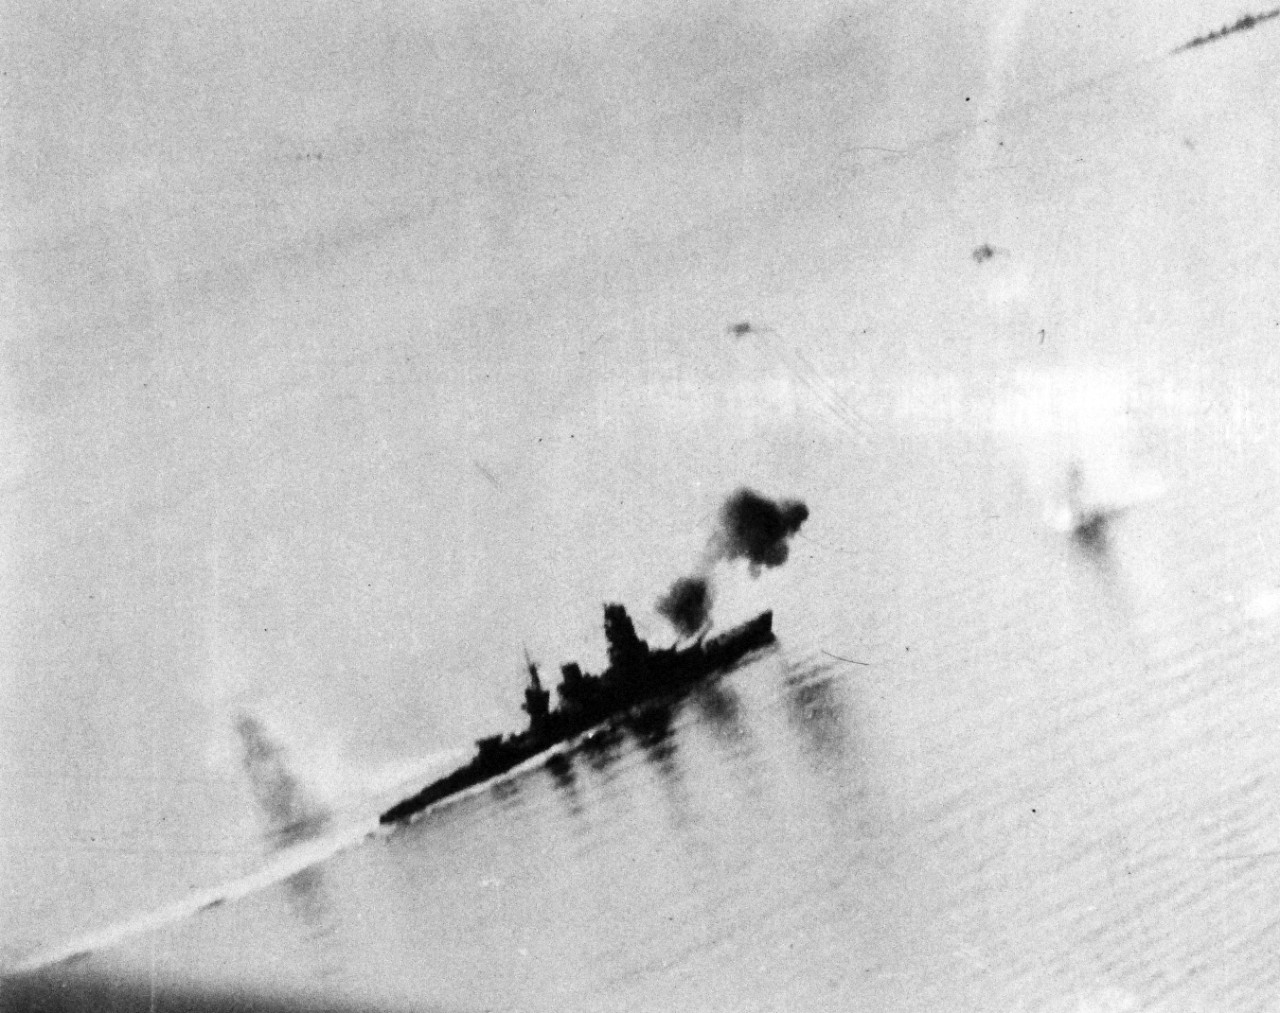 80-G-272557:   Battle of the Sibuyan Sea, October 24, 1944.    Japanese Nagato class BB taken by plane from USS Franklin (CV-13) Official U.S. Navy Photograph, now in the collections of the National Archives.   (2014/5/15).  